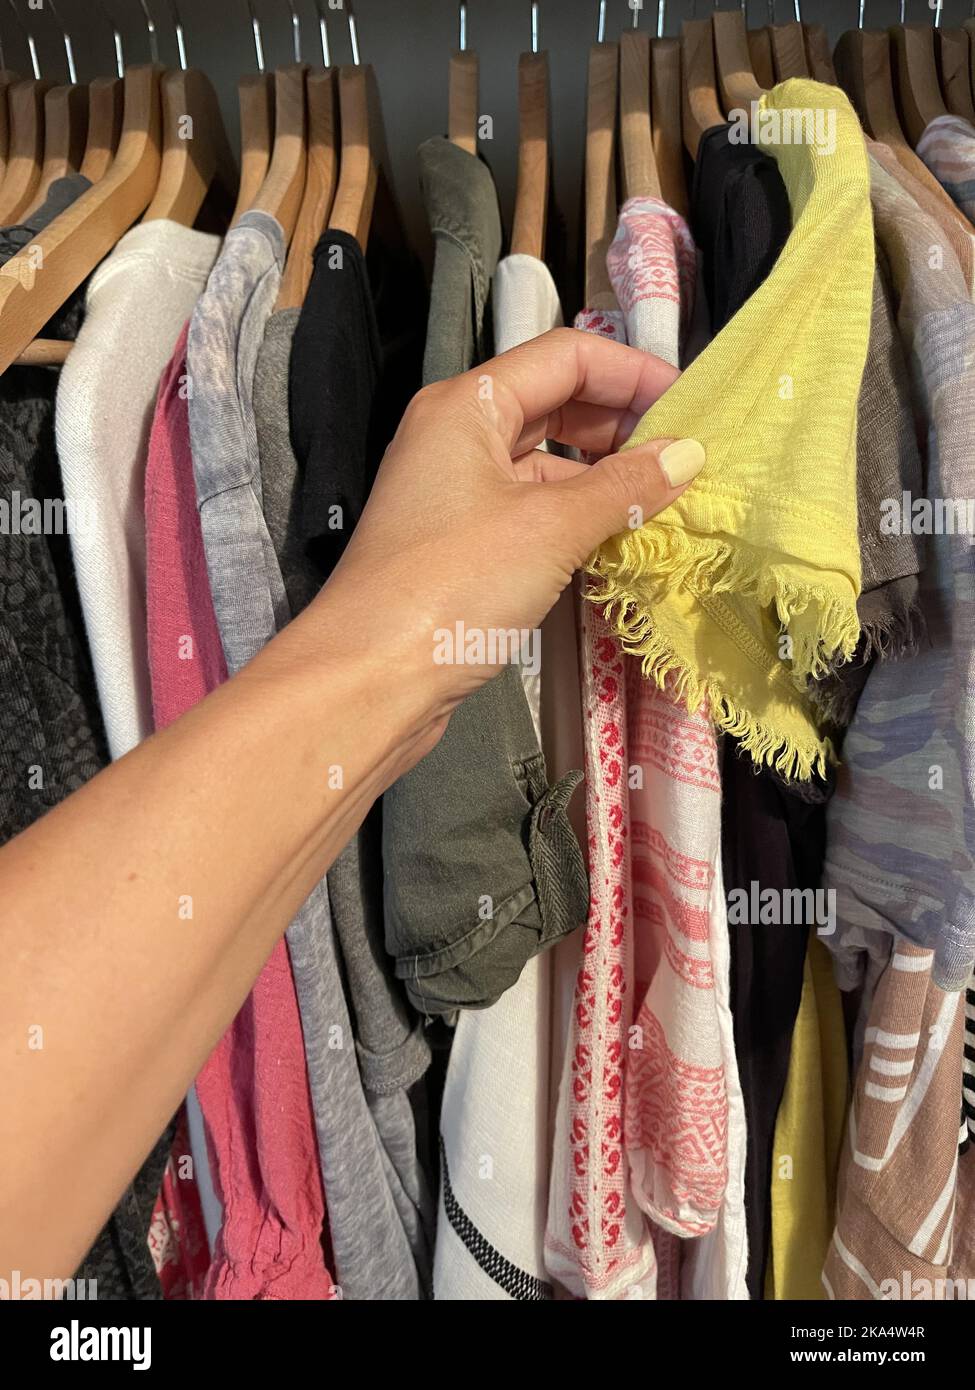 Woman choosing a summer top from a wardrobe Stock Photo